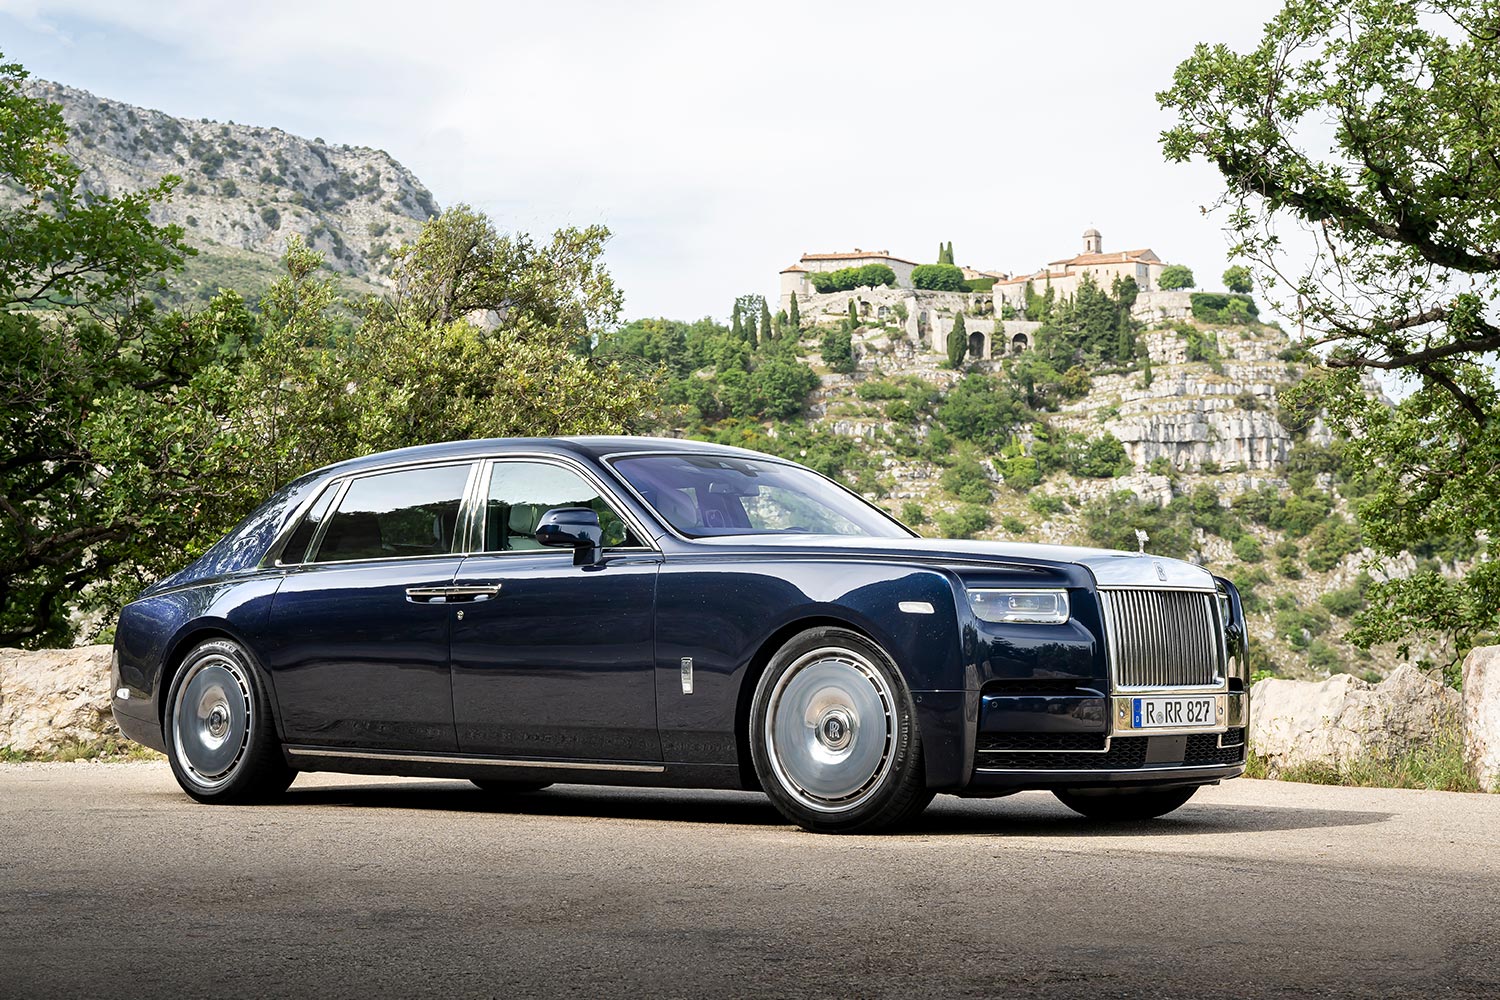 The new Rolls-Royce Phantom Series II, shown with the large disc wheels